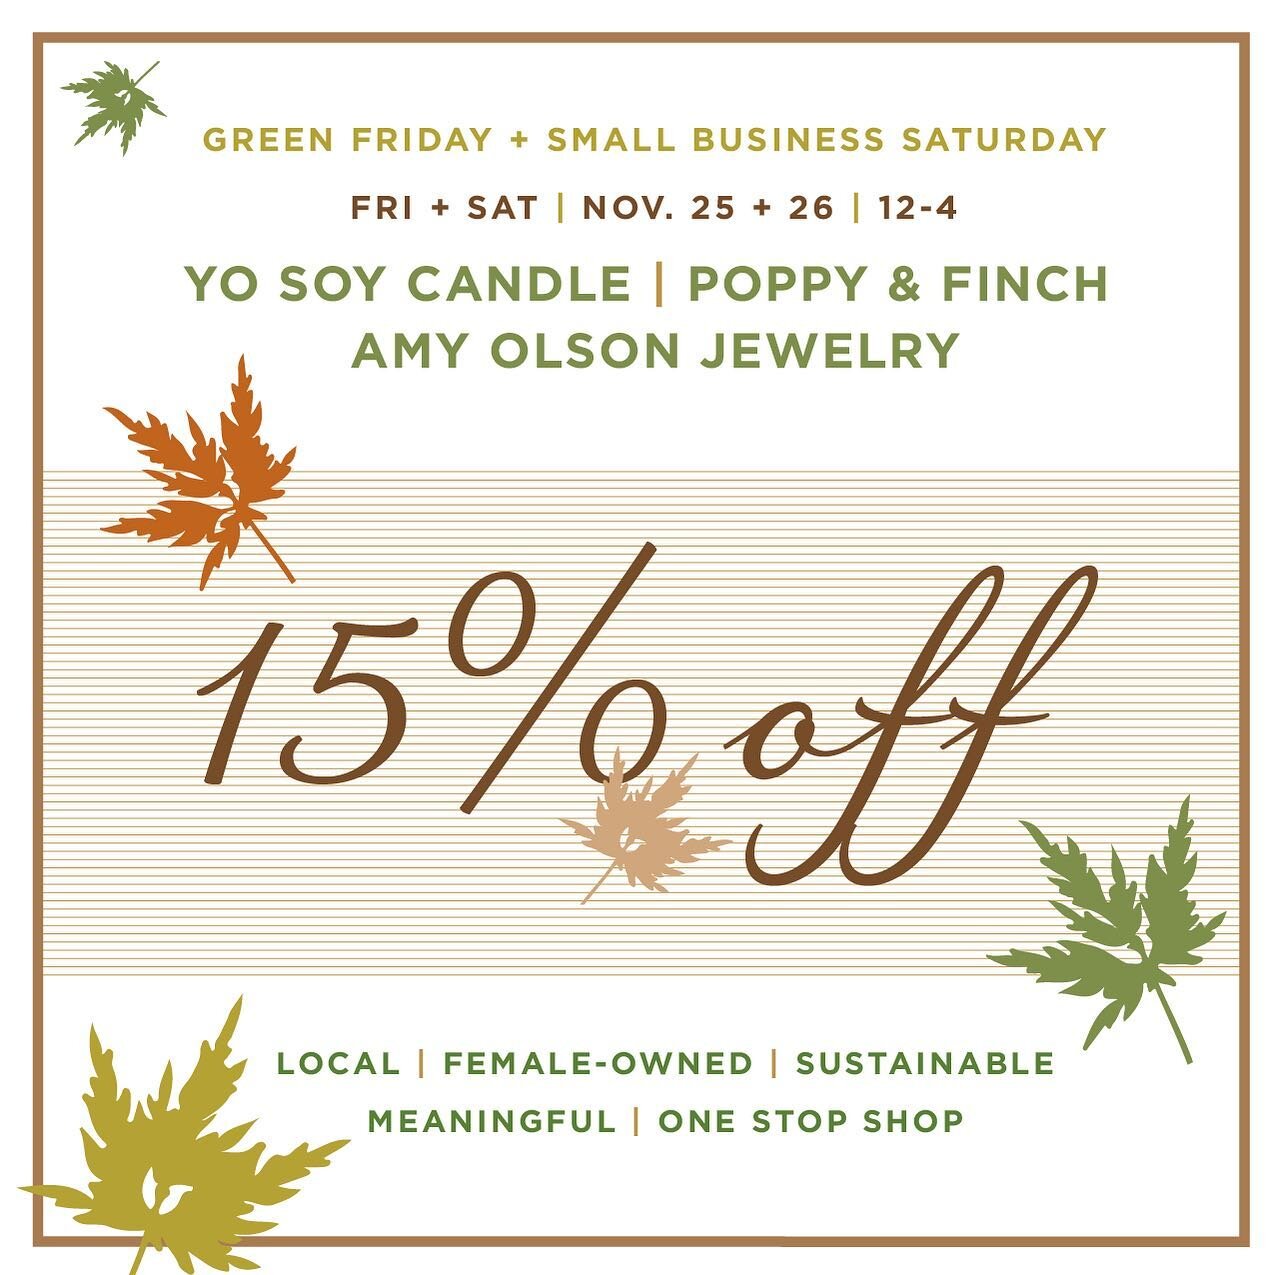 We&rsquo;re at it again today! Kicking off the season for Small Business Saturday by offering 15% off all our products. We are so grateful for your support and truly thank you for choosing us to shop with this holiday season ❤️ 

*****

#amyolsonjewe